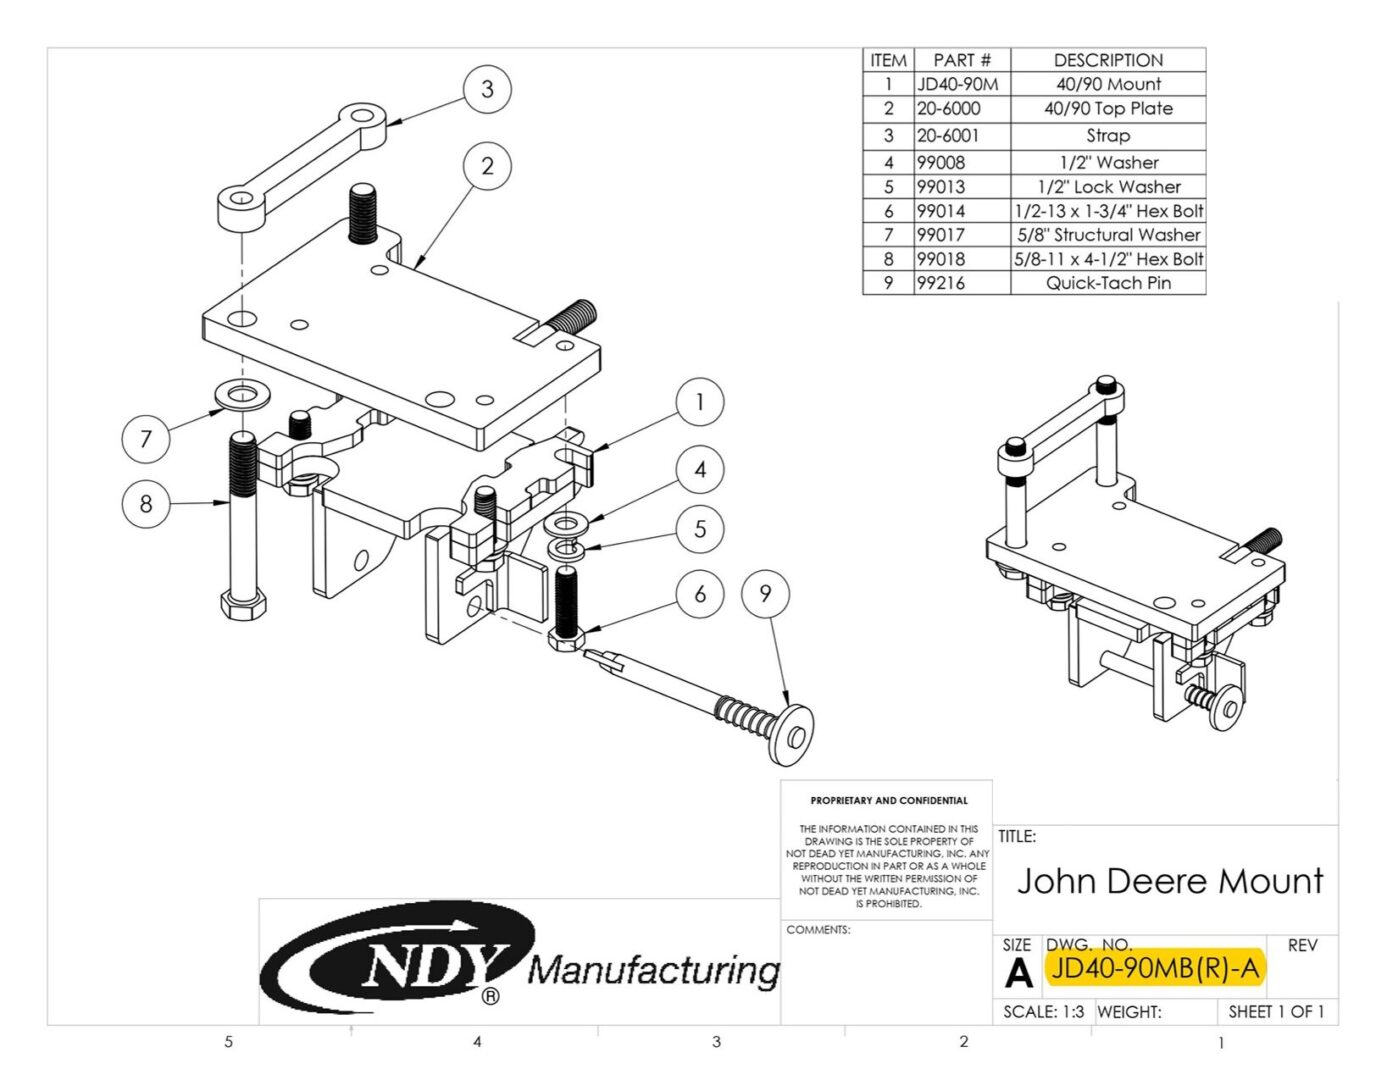 A diagram showing the parts of a Stalk Stomper Mount for Row 3 on John Deere 844/894 Series Corn Head.